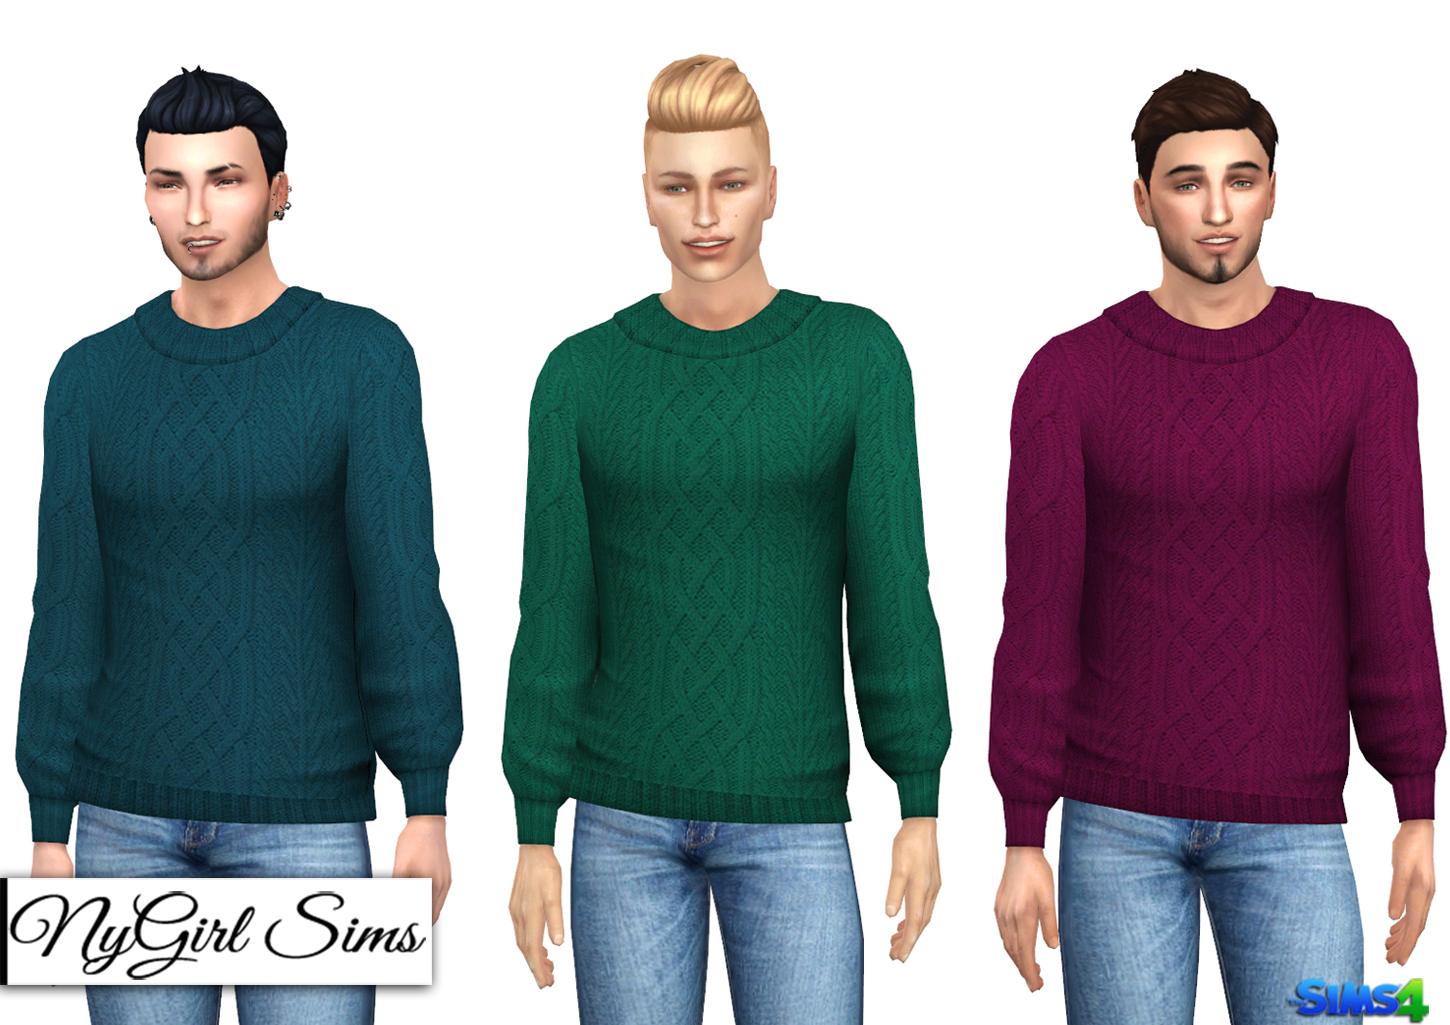 NyGirl Sims 4: Cable Knit Collared Sweater